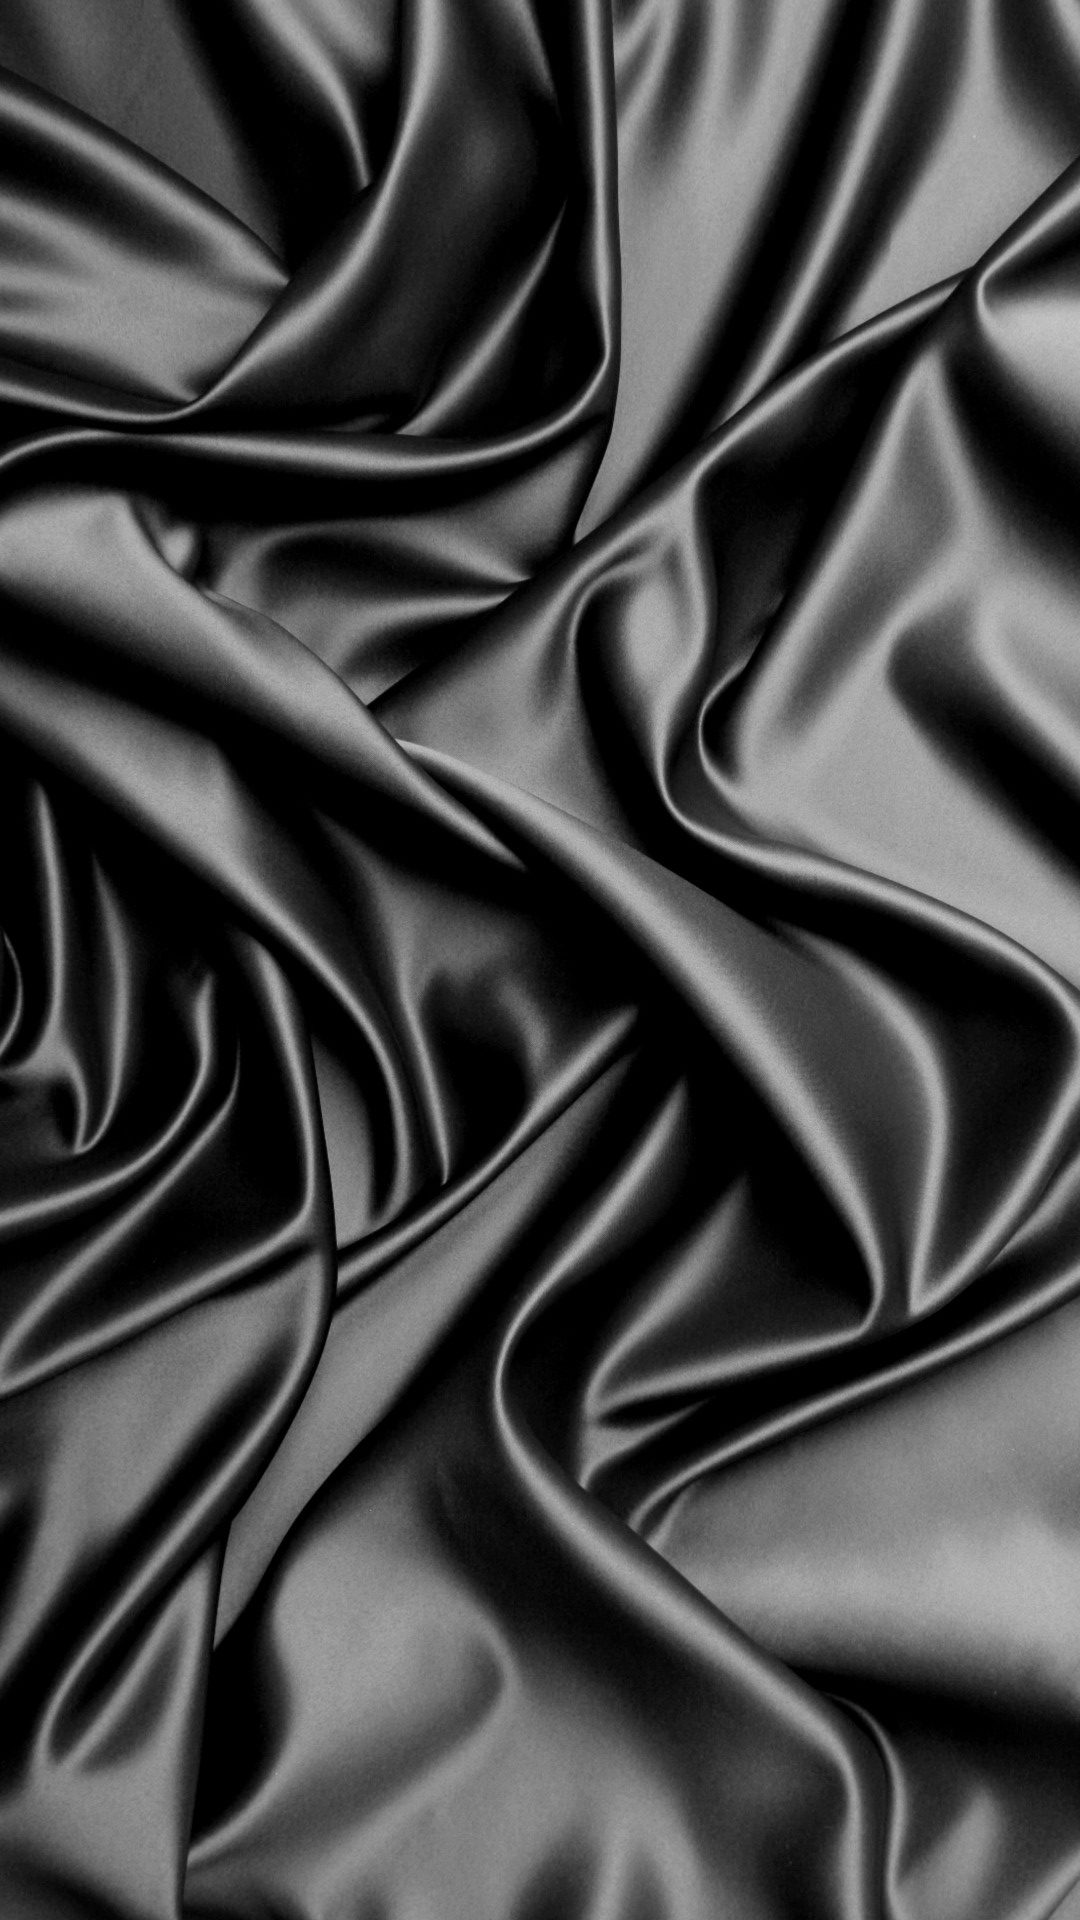 Black Silk Wallpaper for iPhone With high-resolution 1920X1080 pixel. You can use this wallpaper for your iPhone 5, 6, 7, 8, X, XS, XR backgrounds, Mobile Screensaver, or iPad Lock Screen